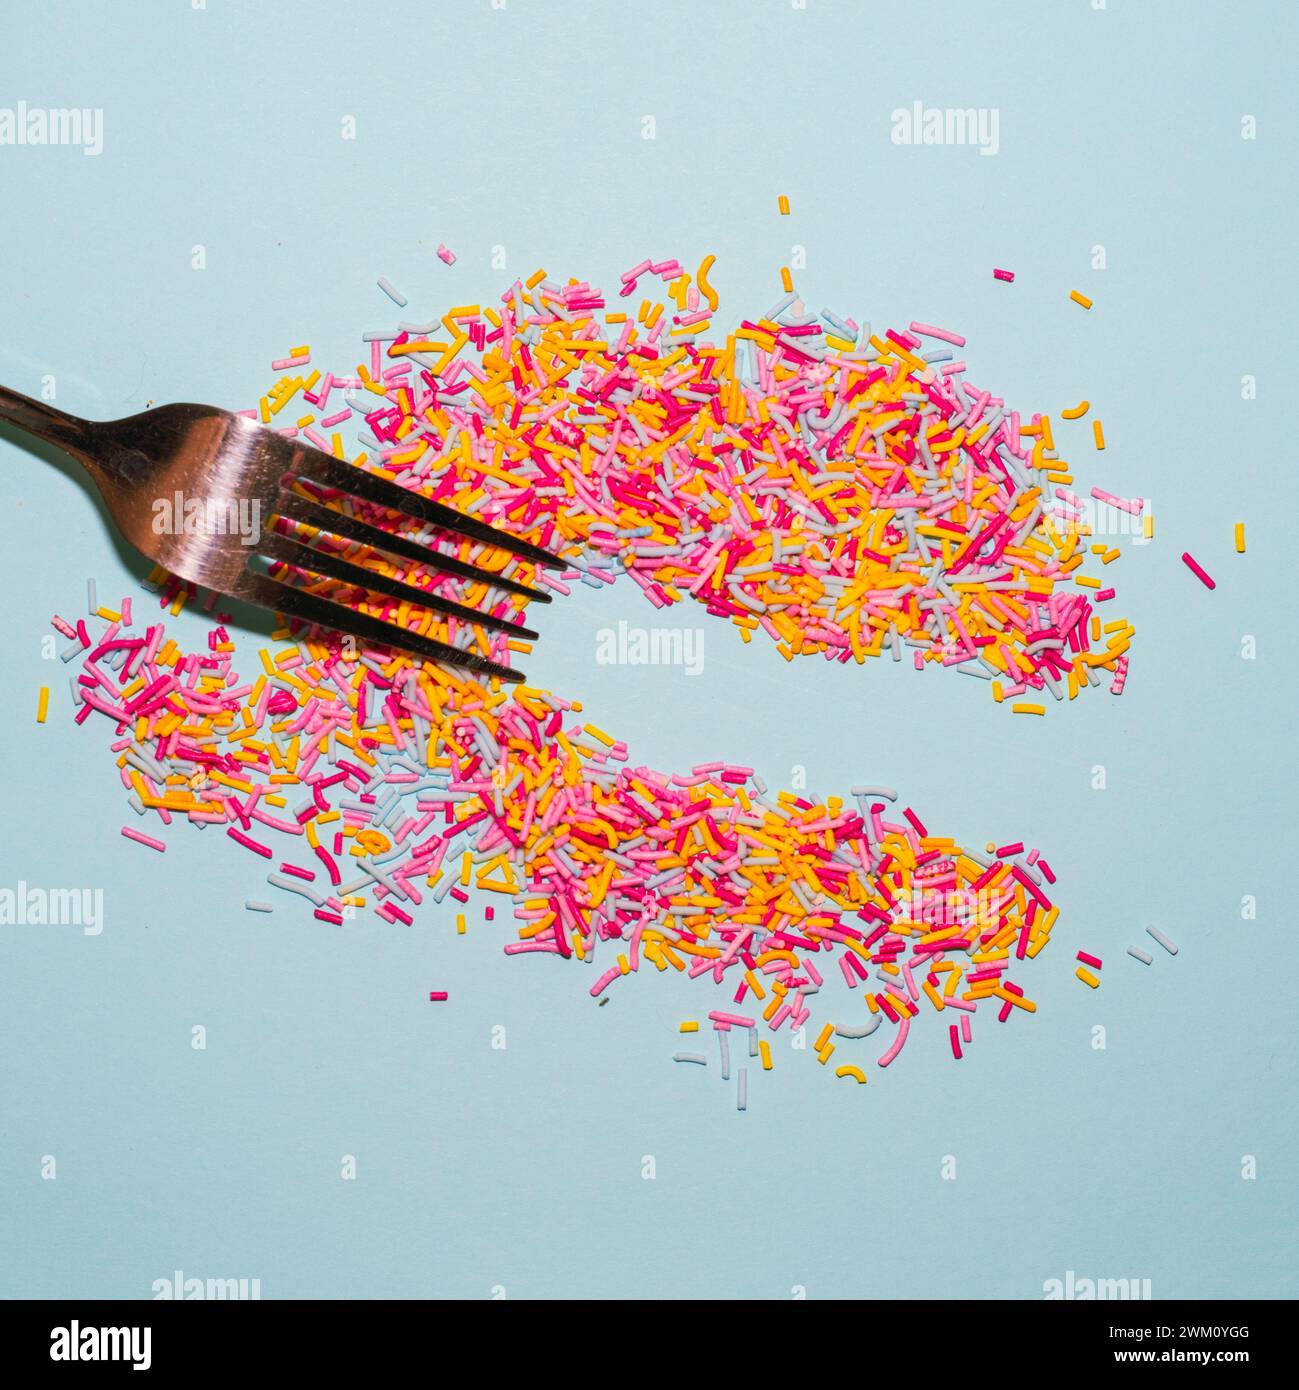 Fork spread colorful sprinkles on blue background. Creative food concept flat lay. Stock Photo